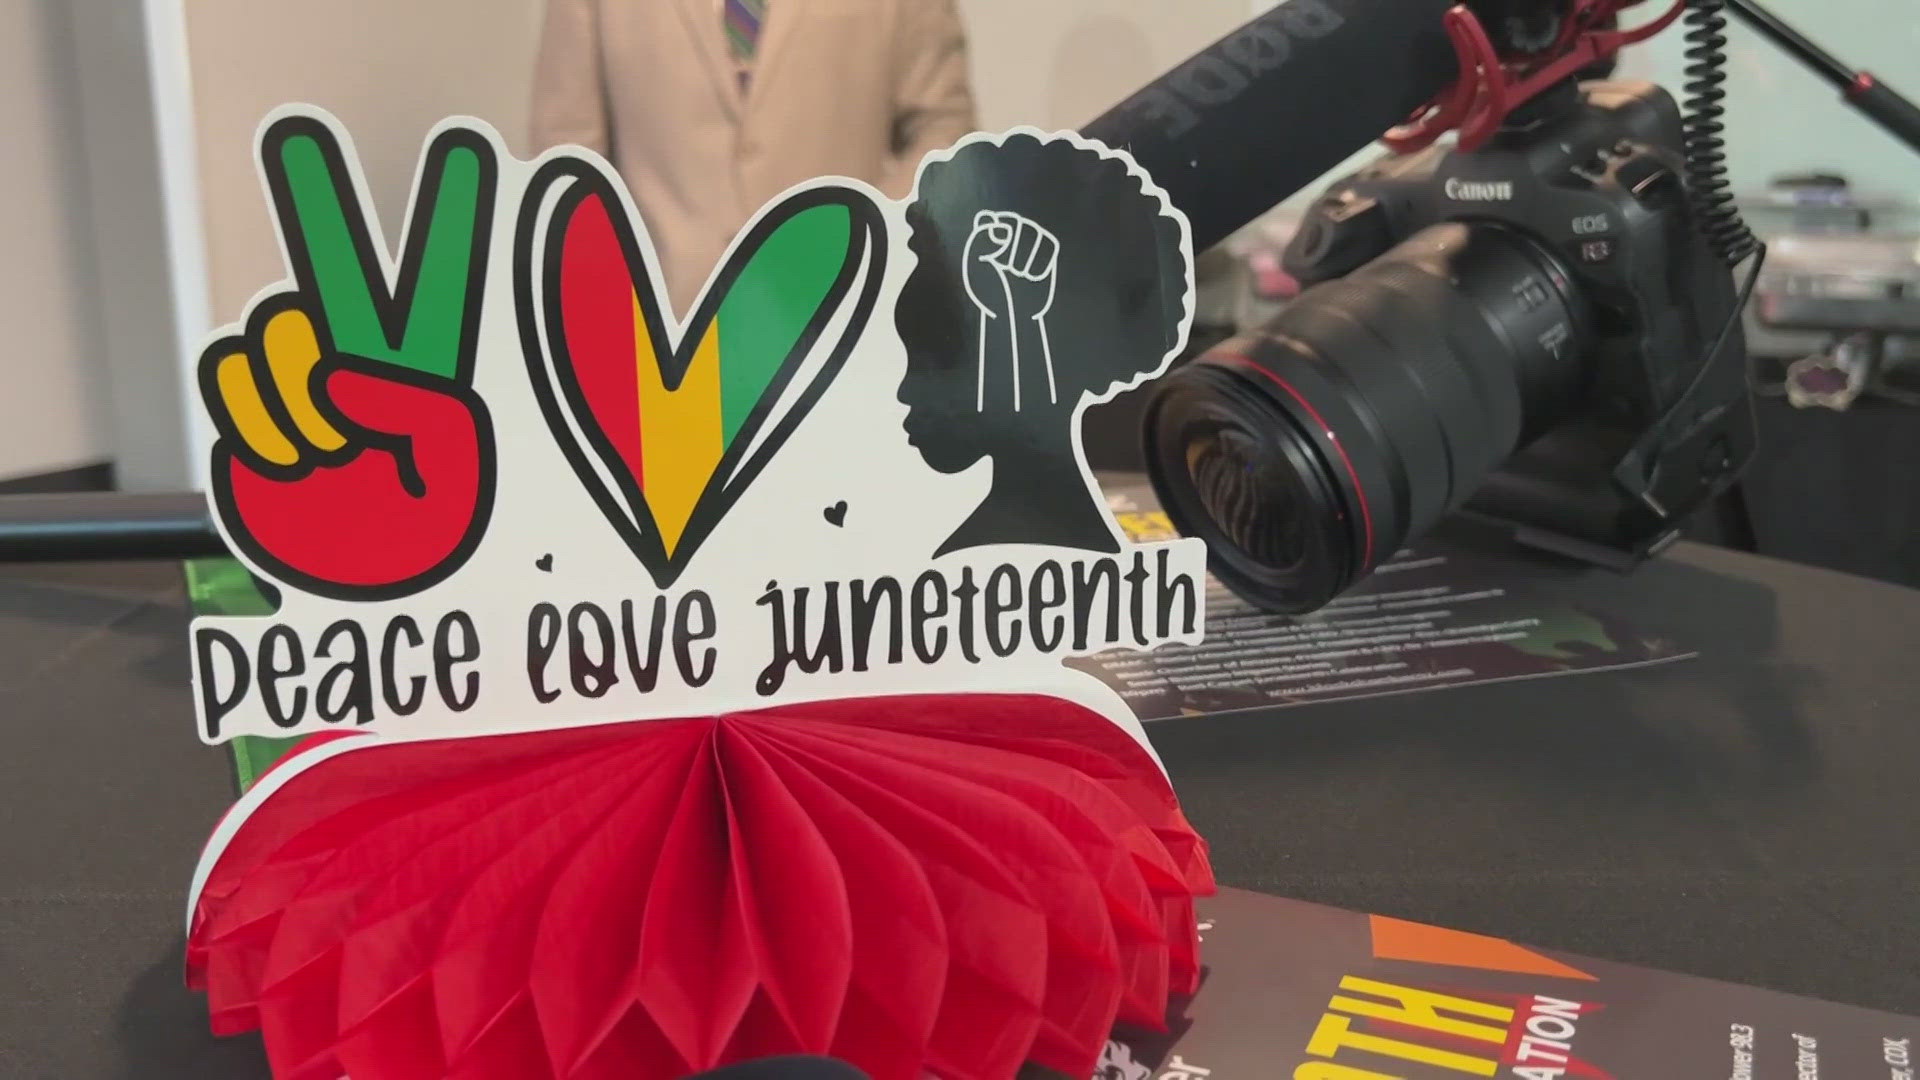 Tuesday night marked the Juneteenth celebrate of Valley businesses.